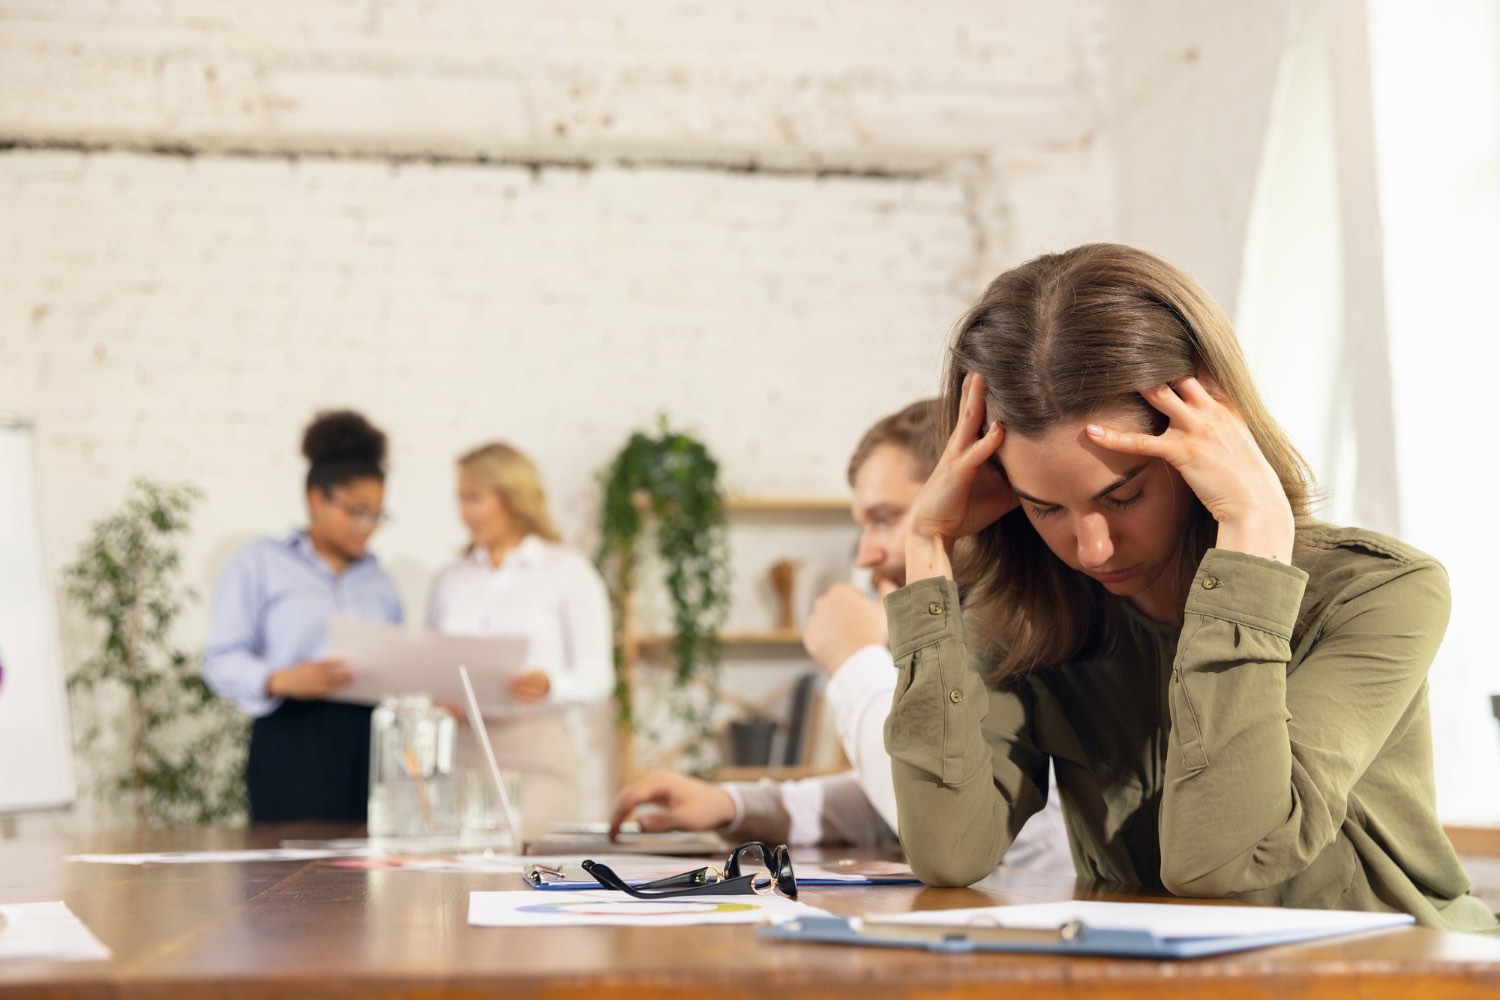 Stressed employee in office because she is grieving a loss